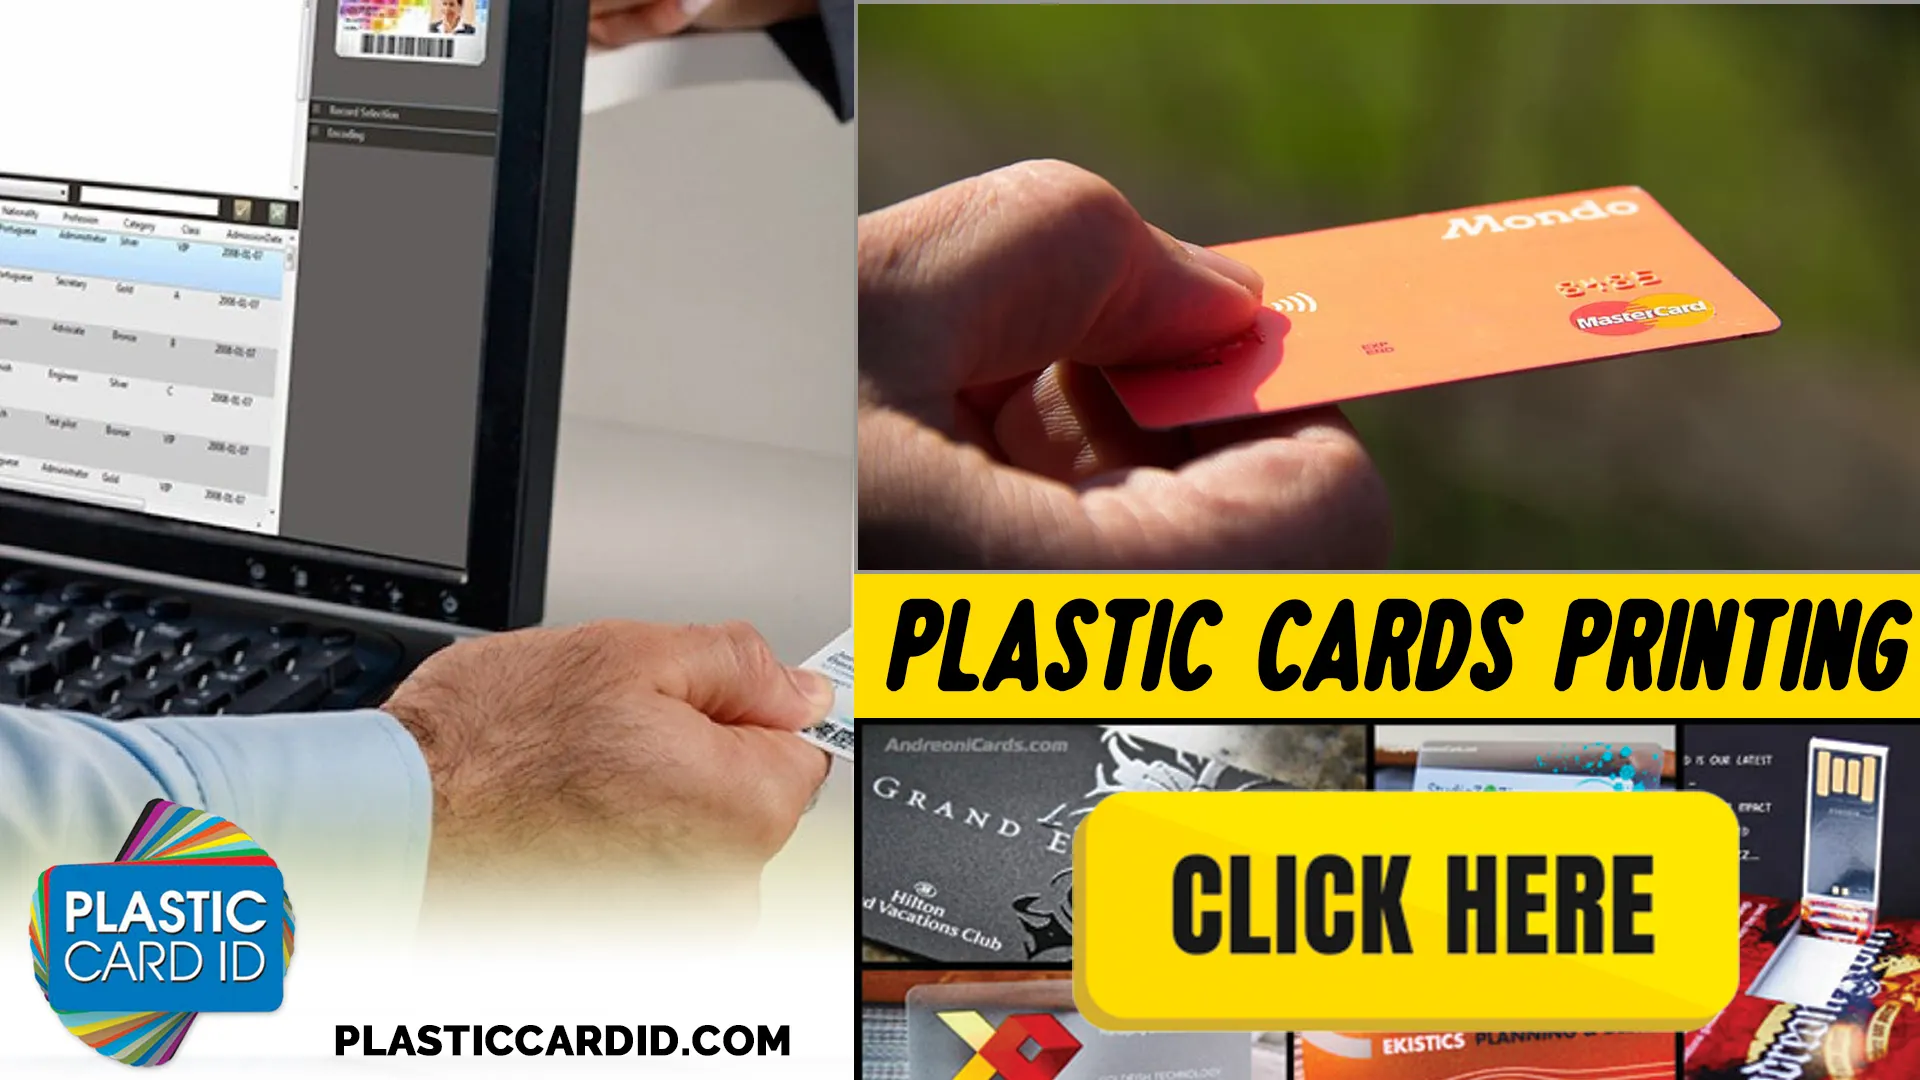 From Design to Delivery: Plastic Card ID
's Comprehensive Card Services